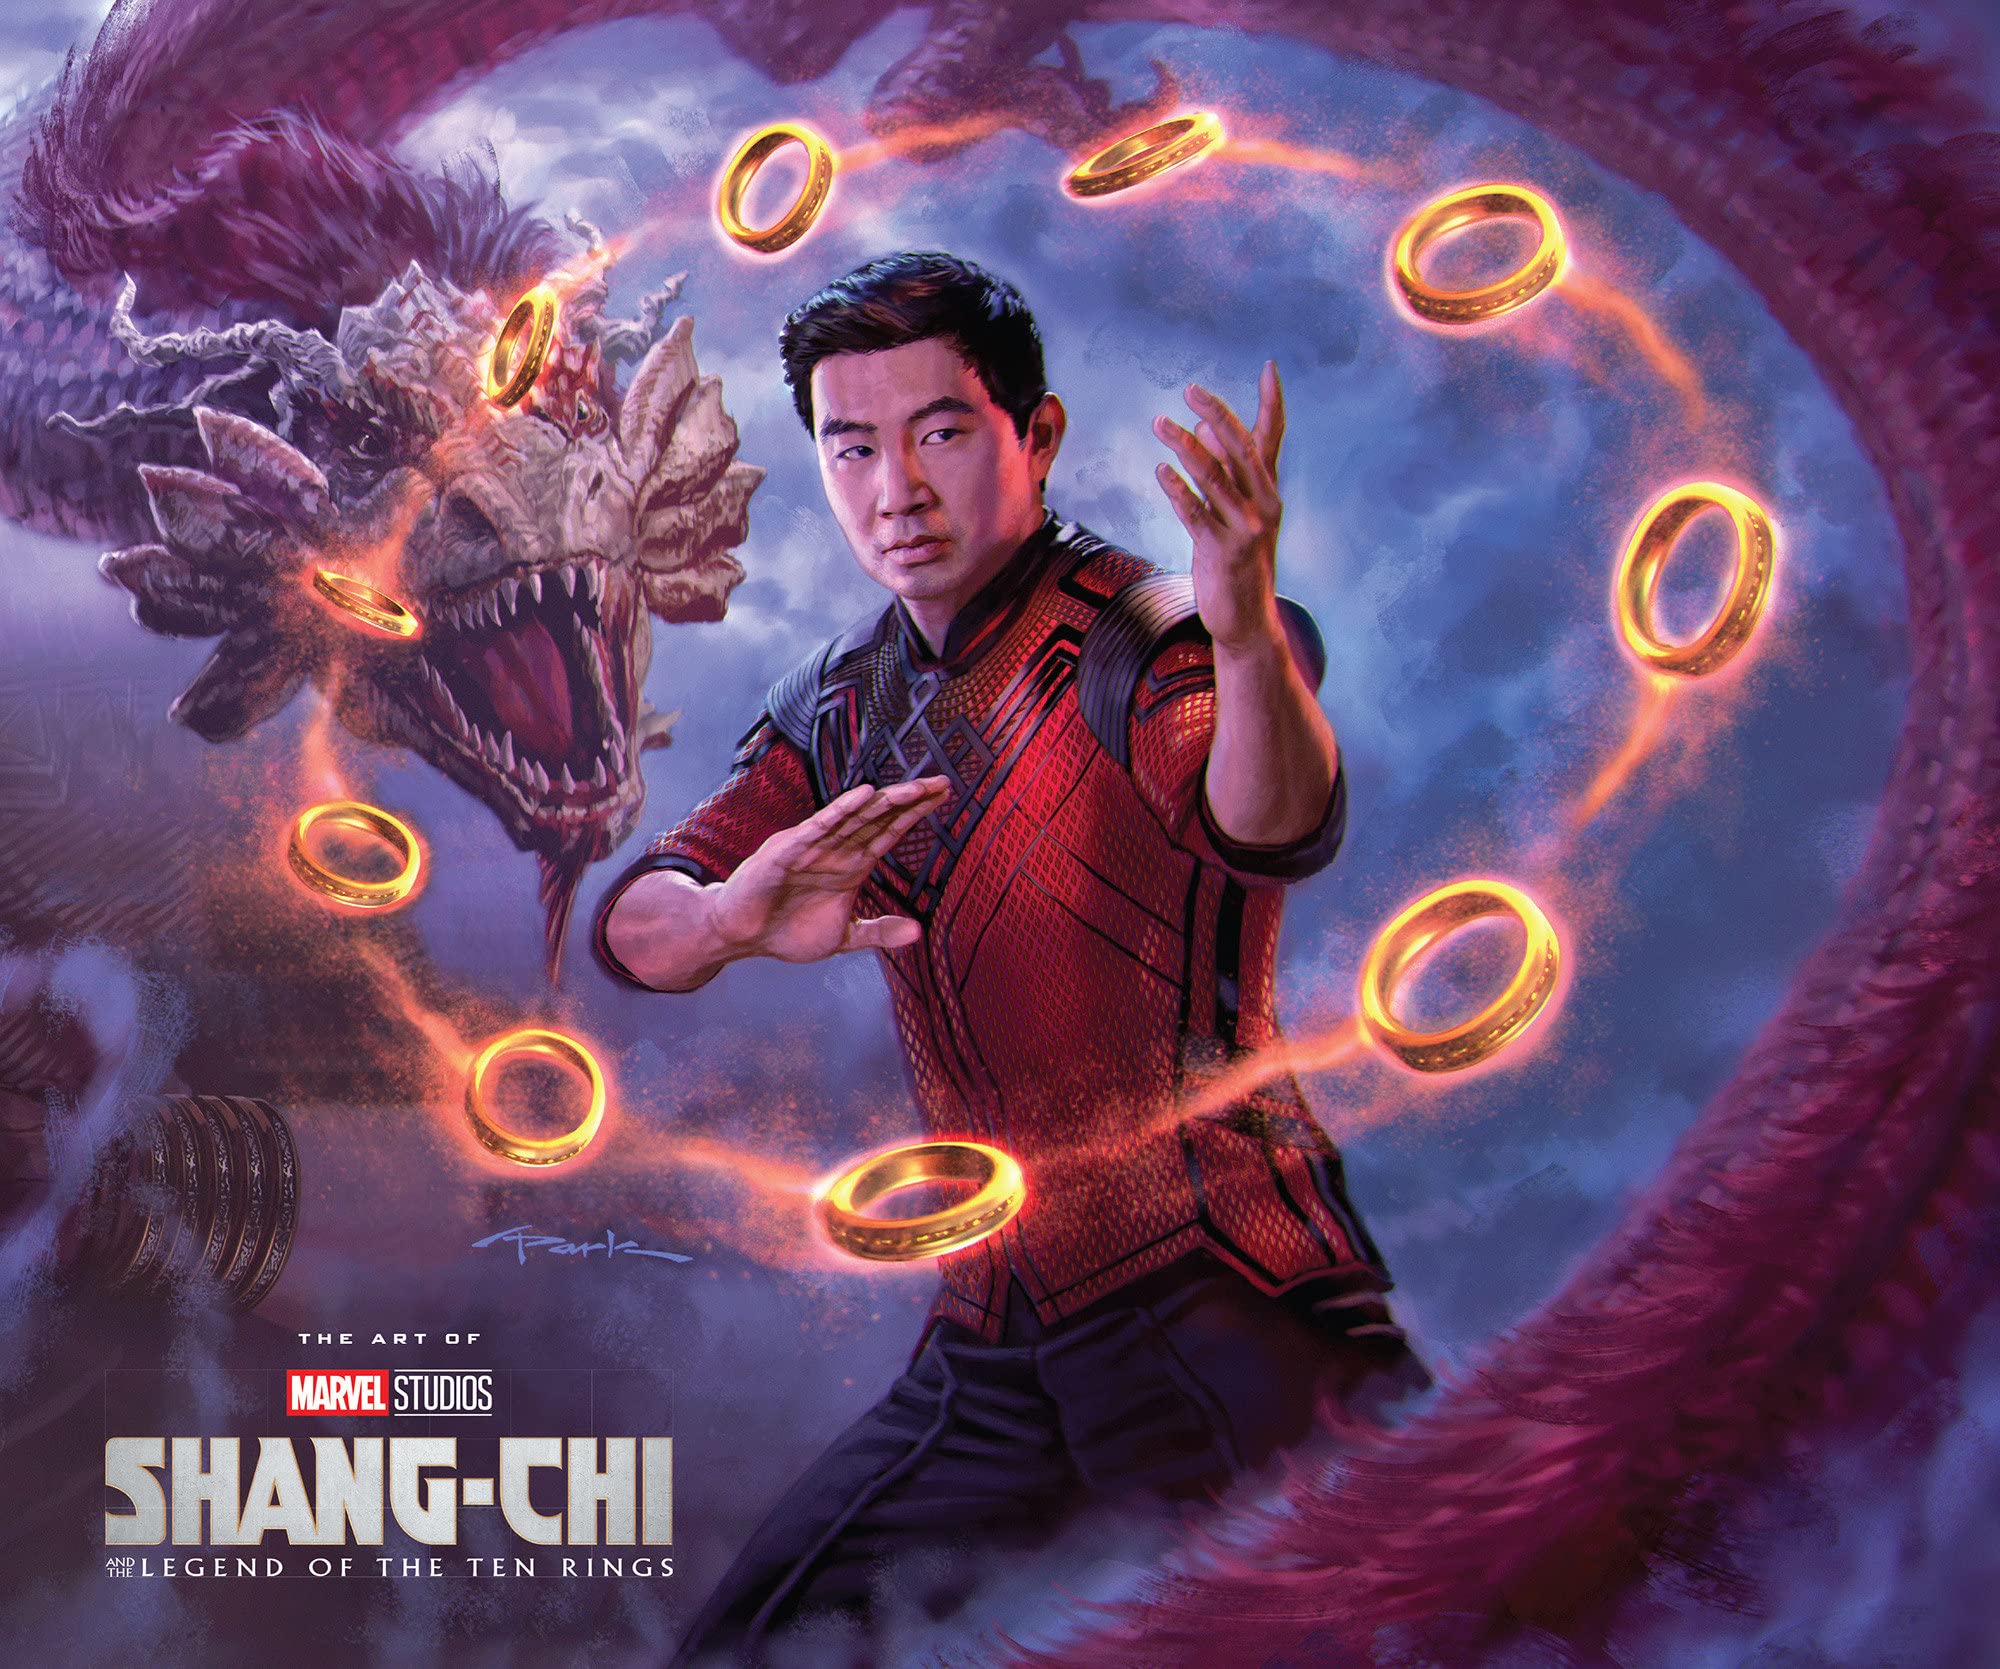 Shang-Chi, Marvel Cinematic Universe Wiki